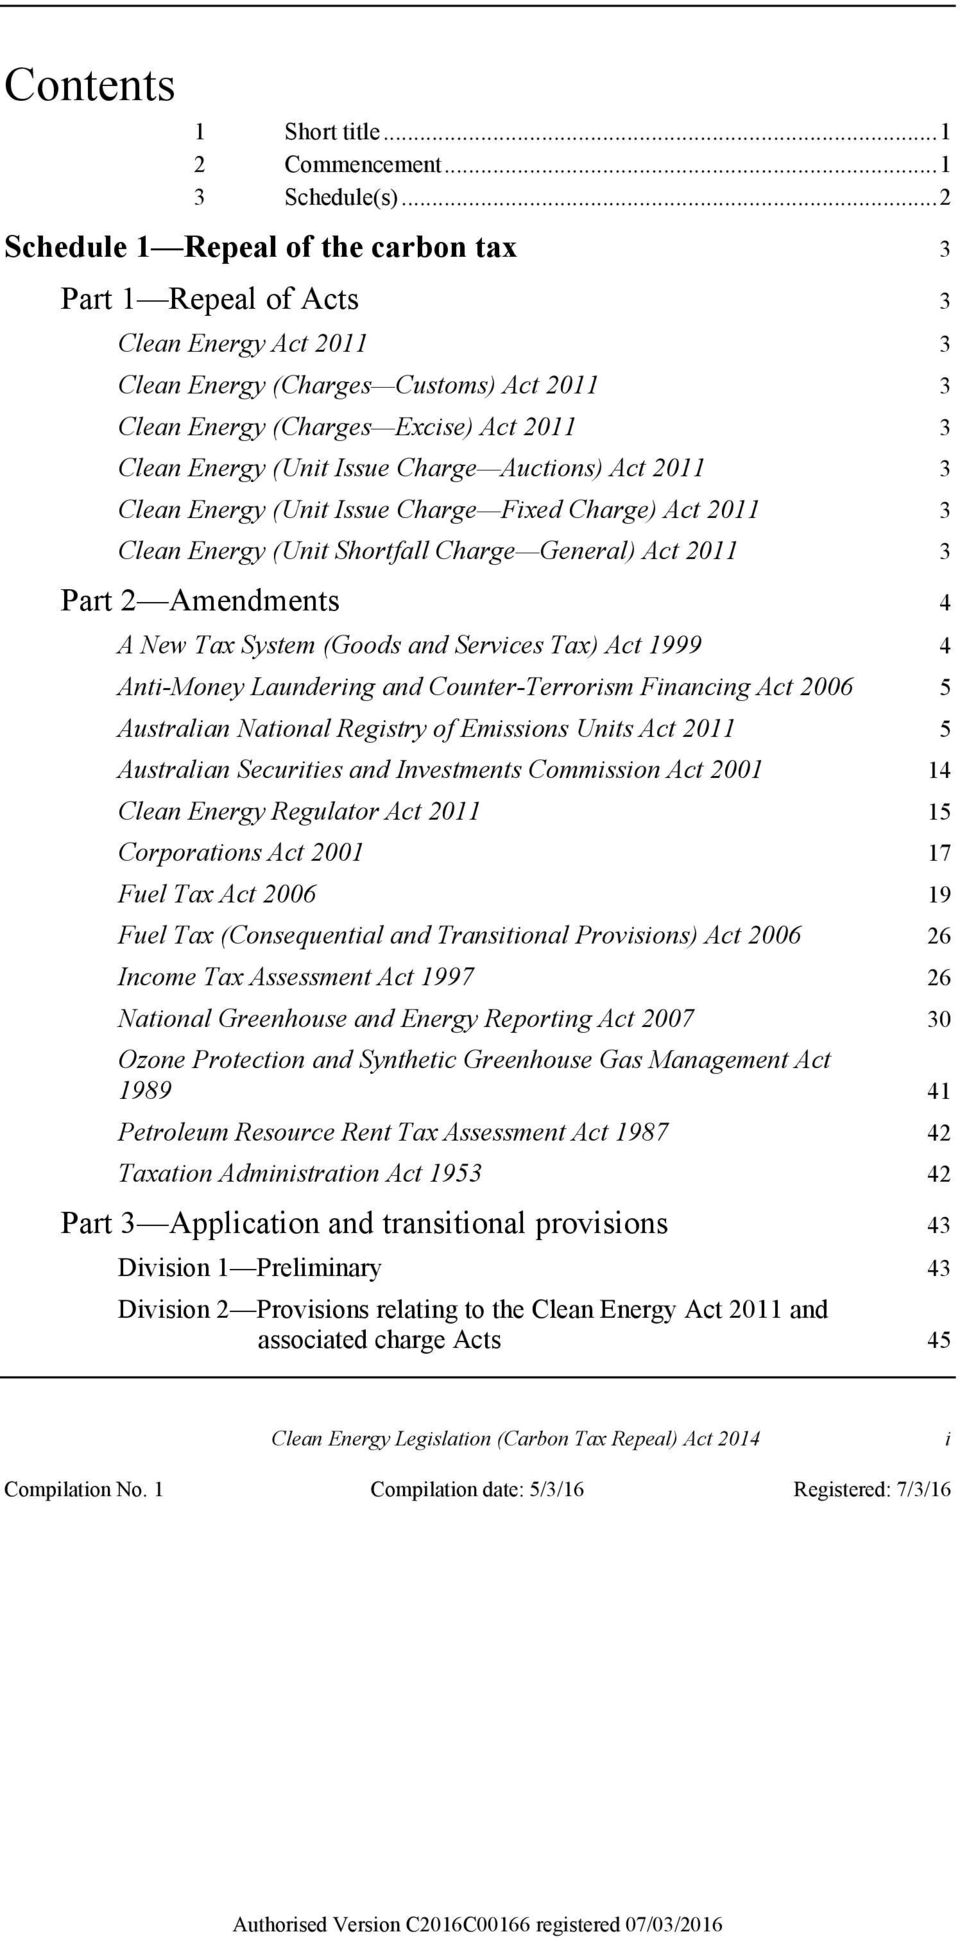 Charge Auctions) Act 2011 3 Clean Energy (Unit Issue Charge Fixed Charge) Act 2011 3 Clean Energy (Unit Shortfall Charge General) Act 2011 3 Part 2 Amendments 4 A New Tax System (Goods and Services